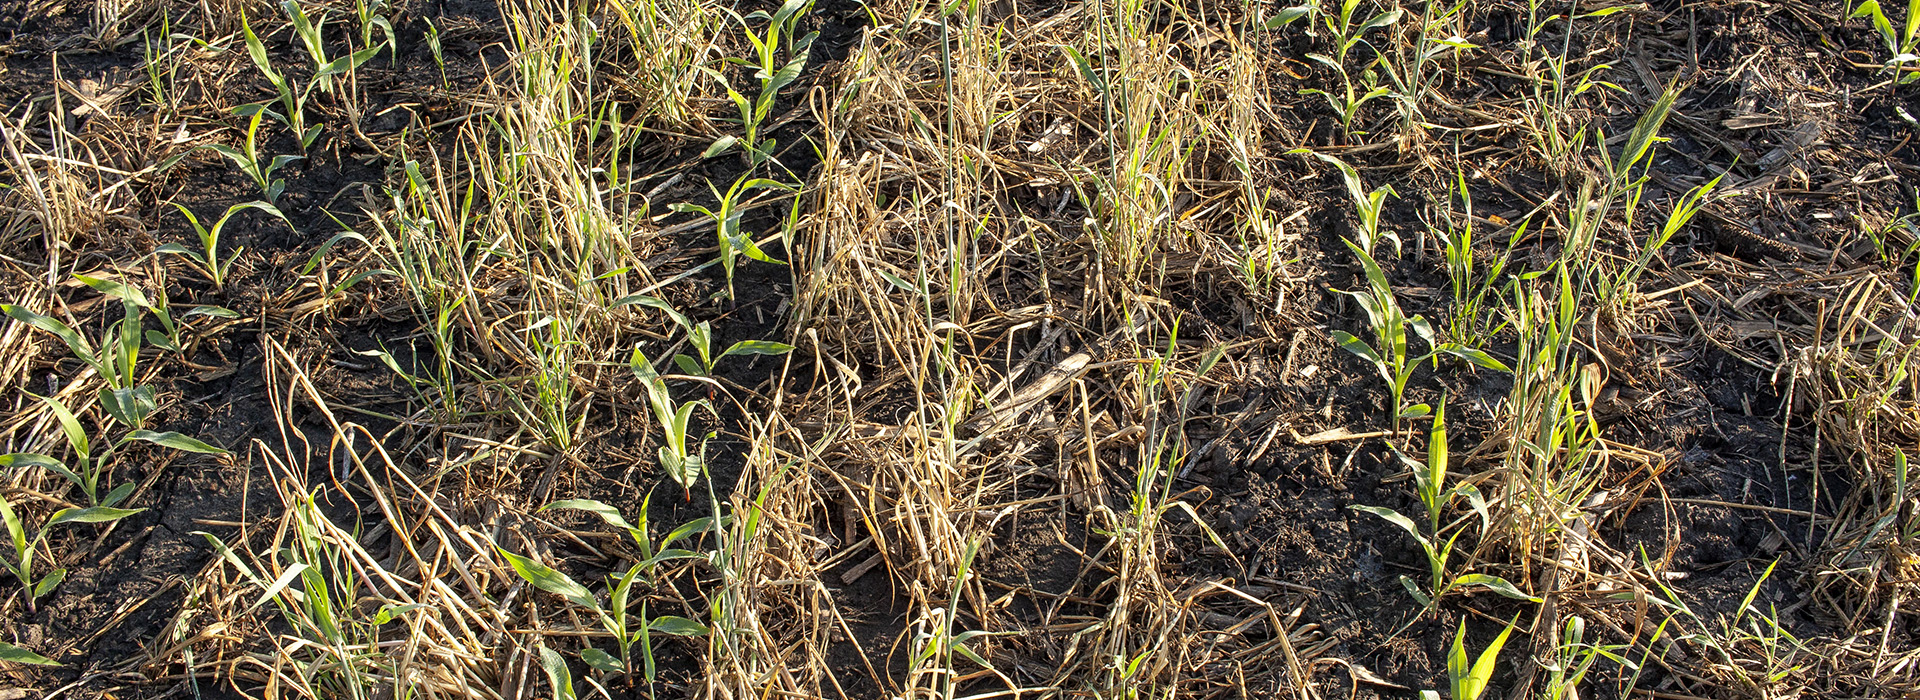 emerging sprouts in no-till field